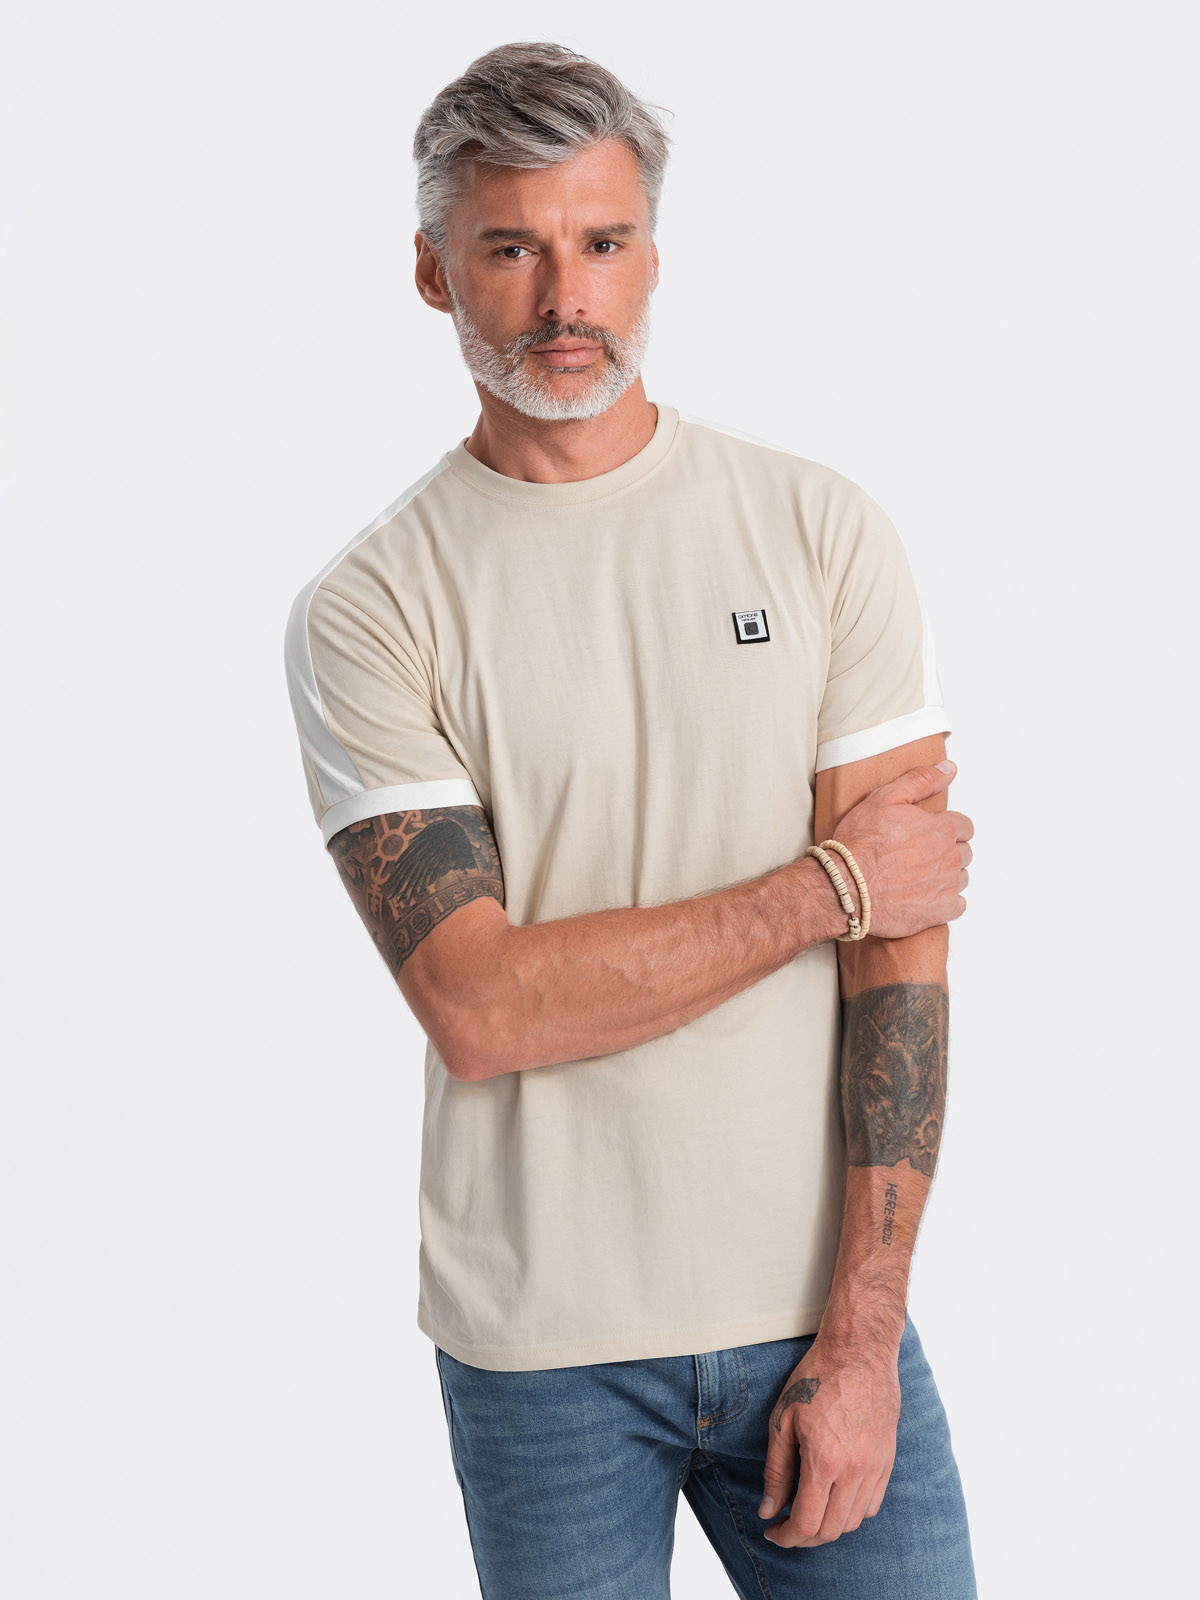 Men's cotton t-shirt with contrasting inserts V7 S1632